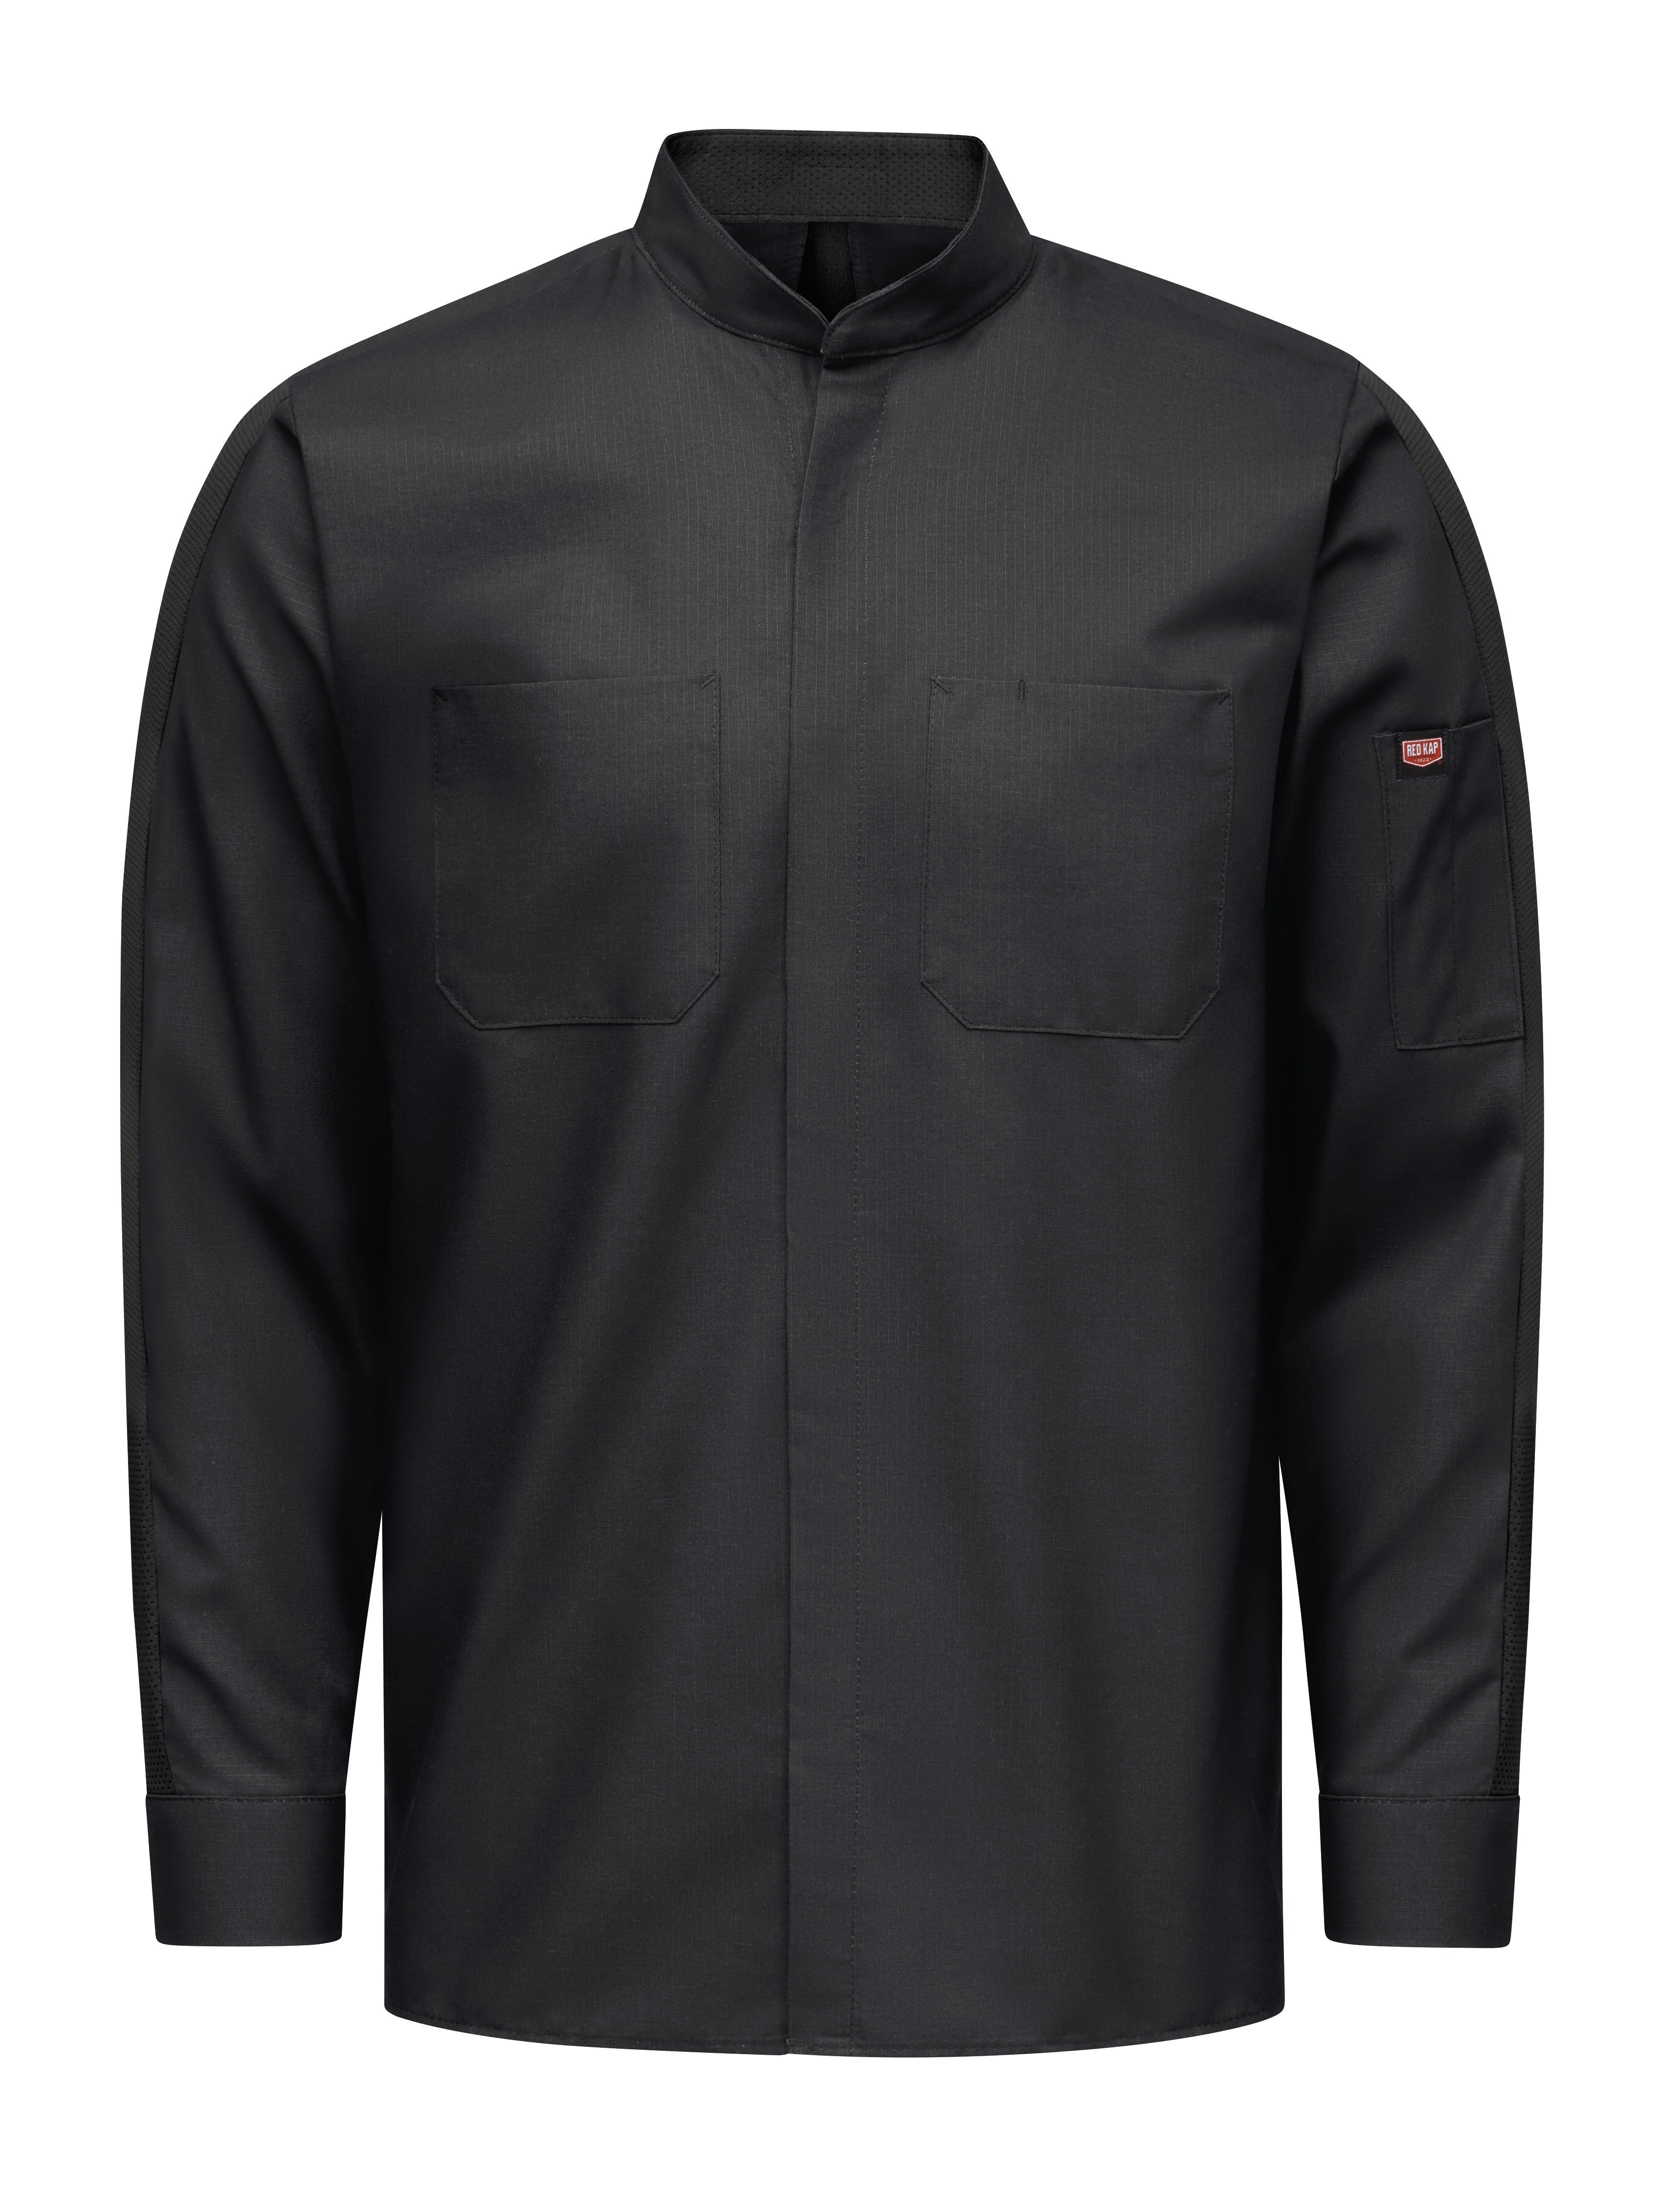 Men's Long Sleeve Pro+ Work Shirt with OilBlok and Mimix SX36 - Black-eSafety Supplies, Inc